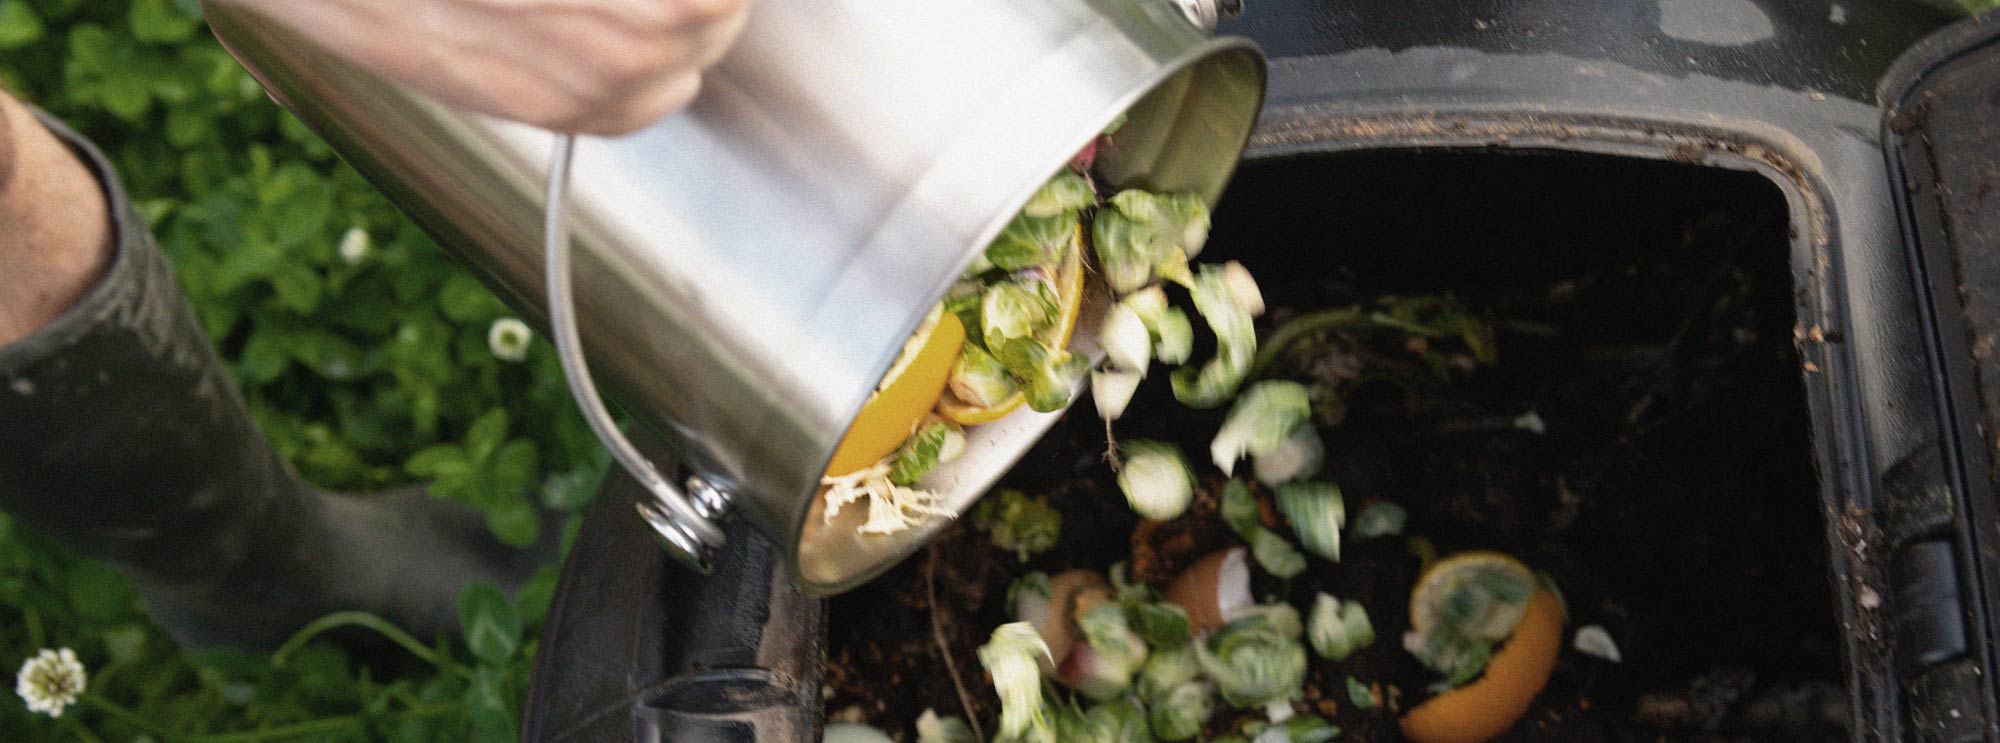 Pouring food scraps into a composter